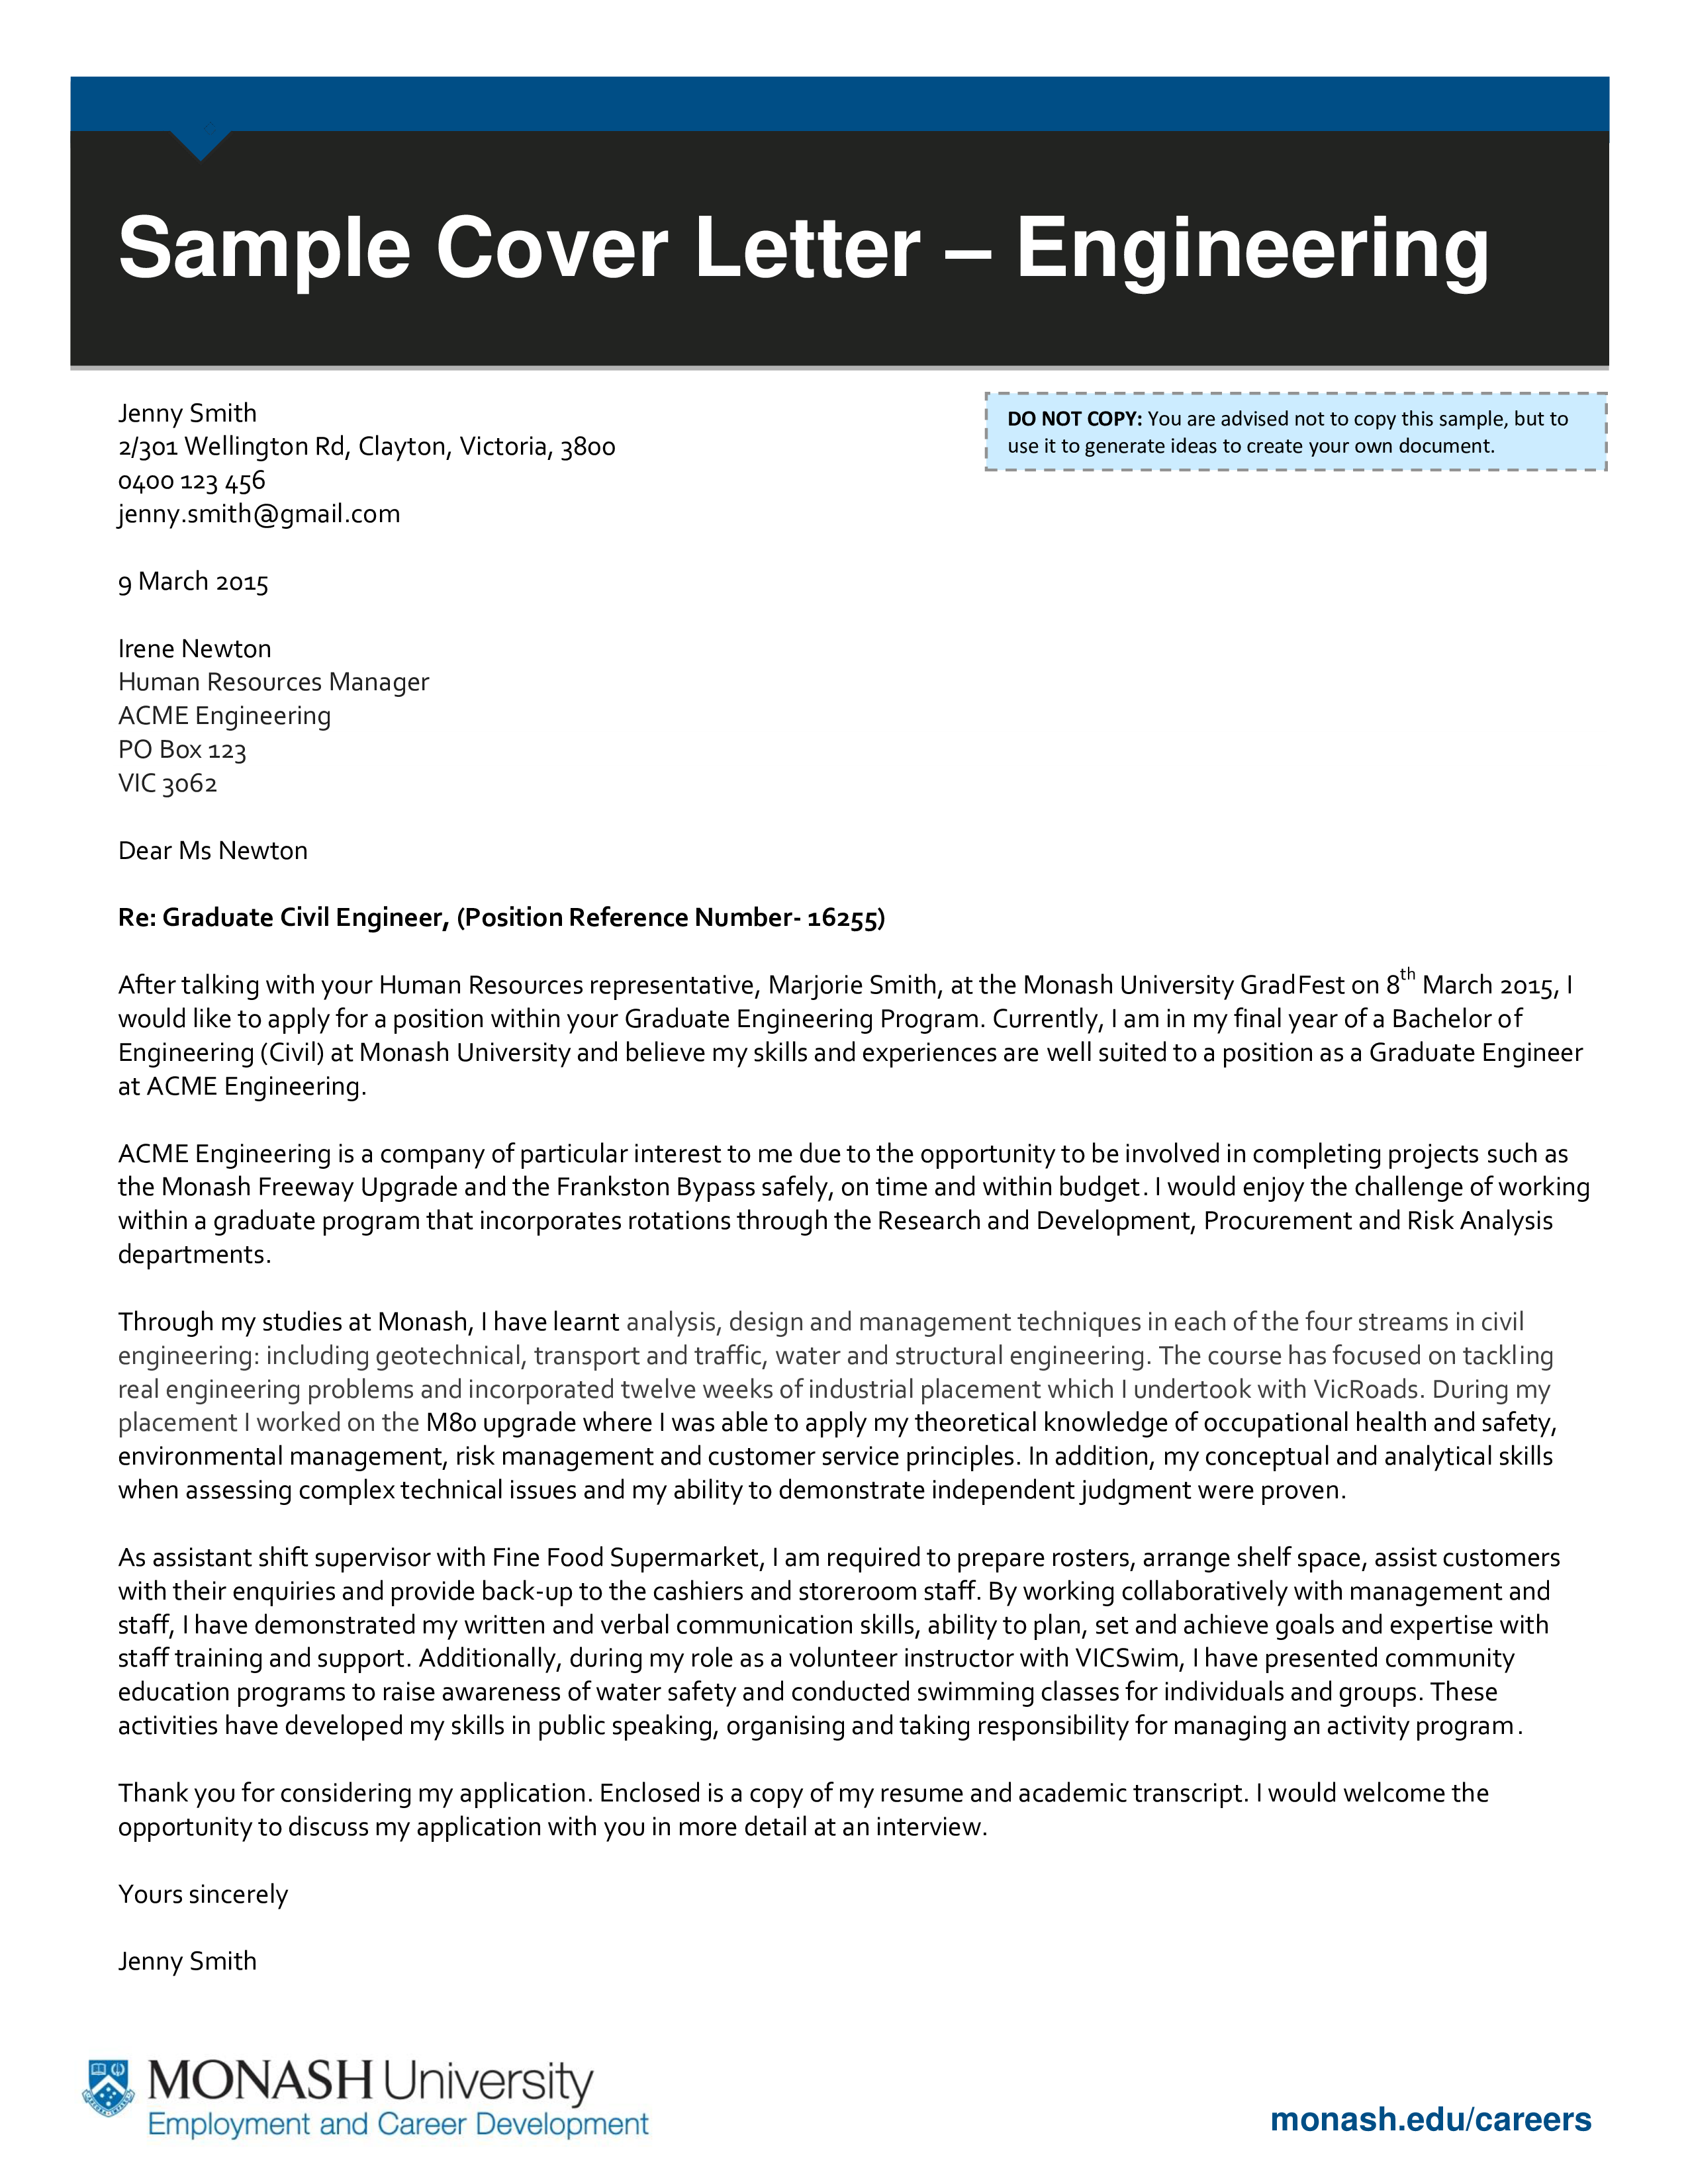 Engineering Resume Cover Letter Sample main image